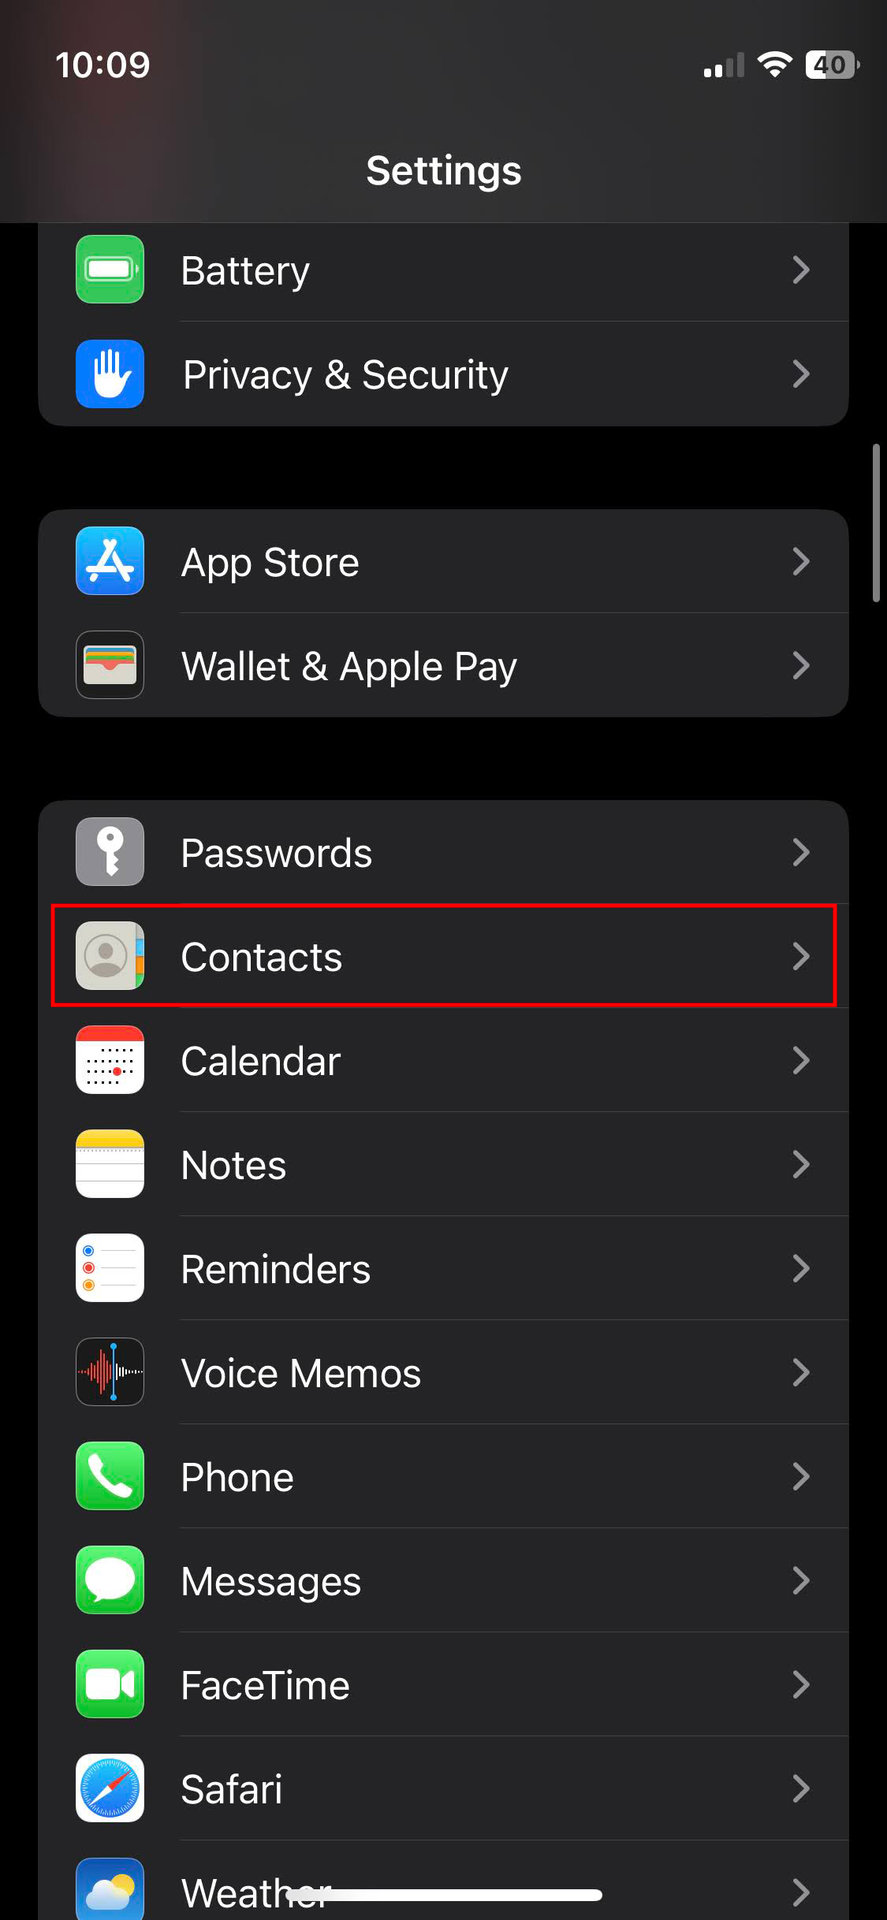 How to transfer contacts from iPhone to Android using your Google account 1